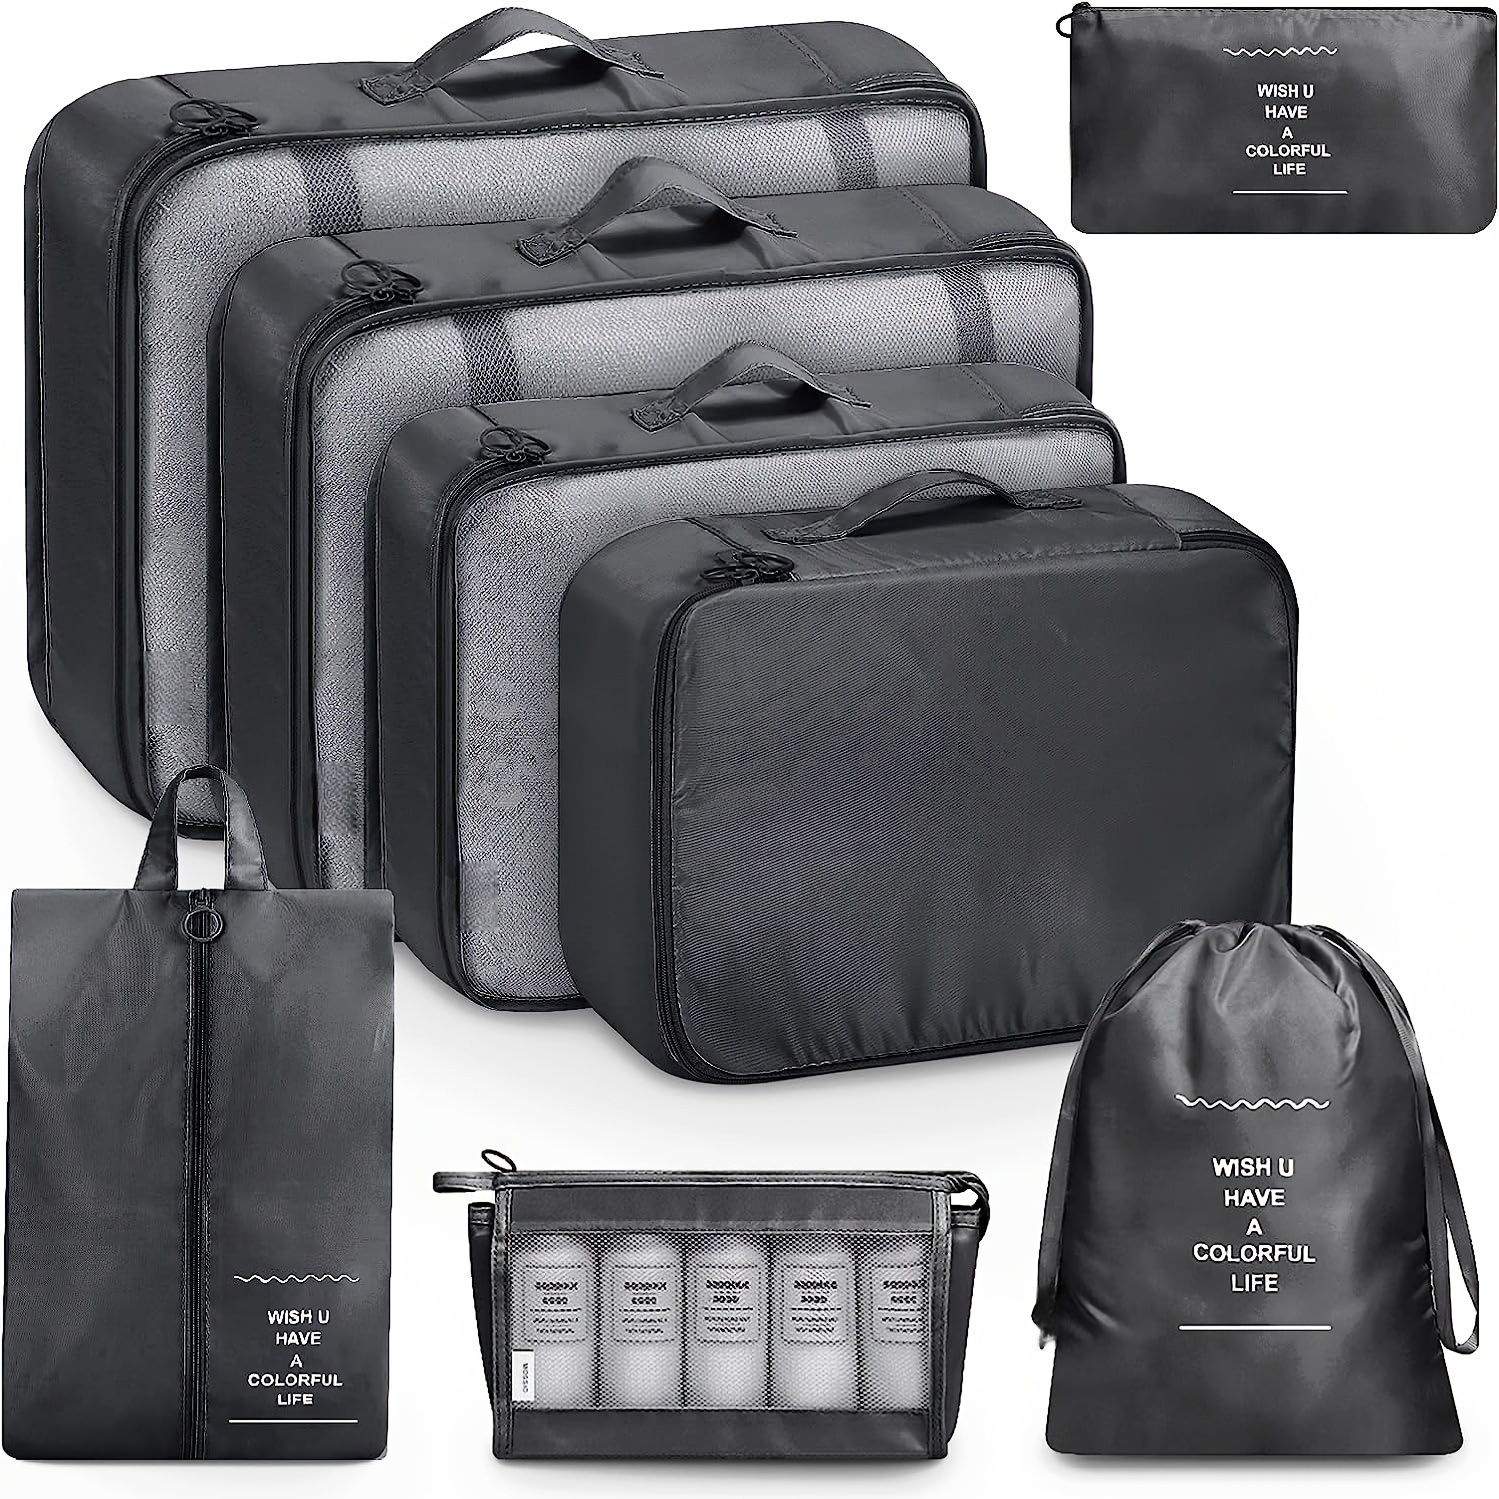 Hanging Airplane Seats And Car Pockets, Carry-on Suitcase Storage Bag,  Multi Pockets Travel Organizer